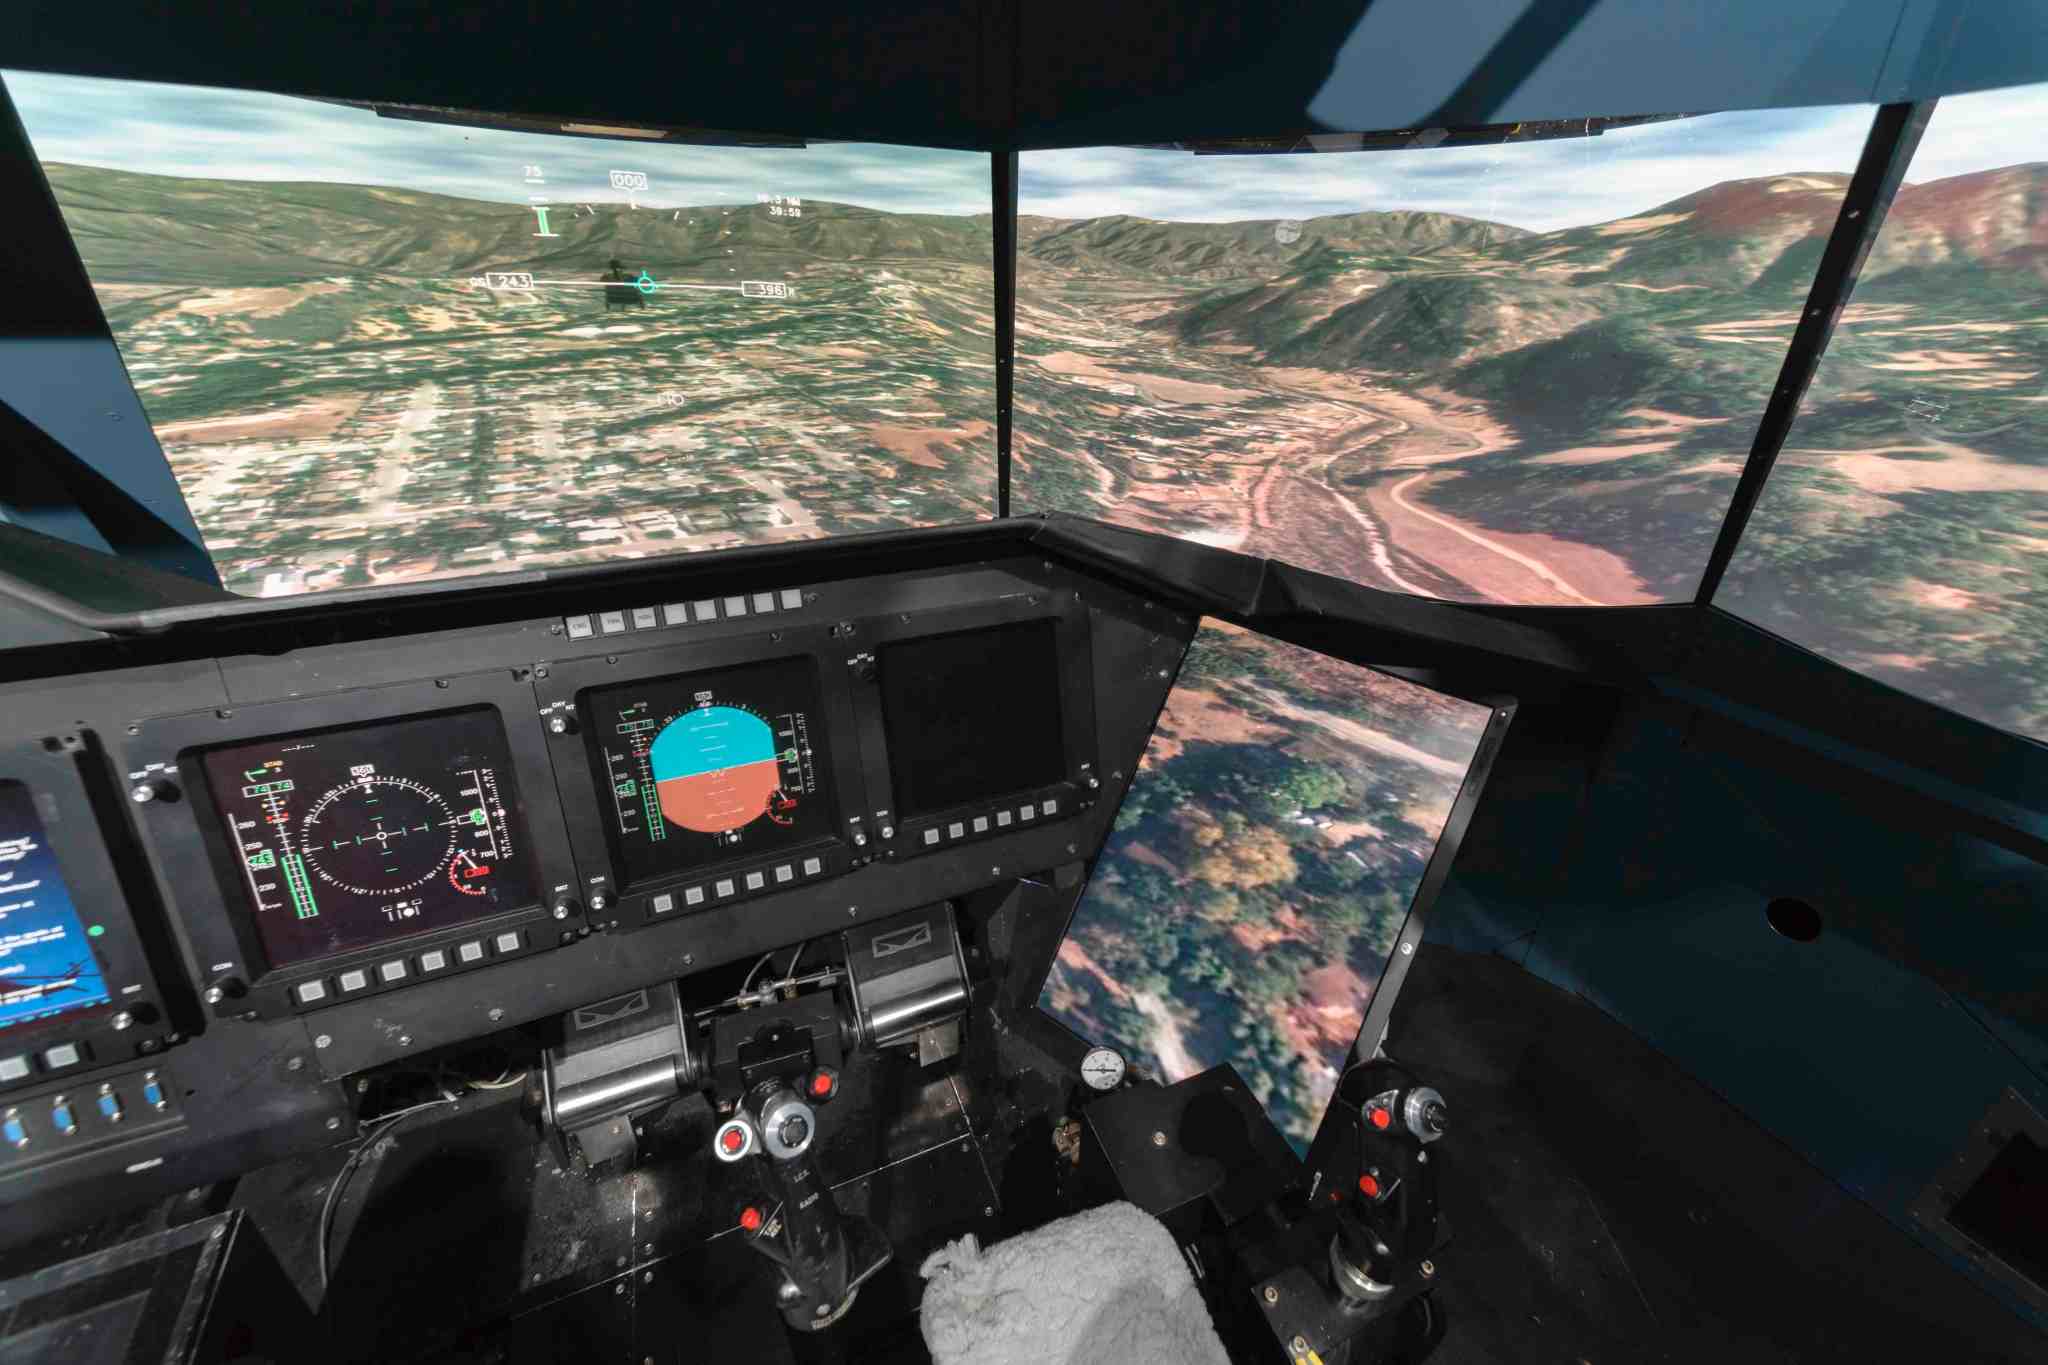 Out-the-window view of rotorcraft simulated on the Vertical Motion Simulator. Includes view of avionics.